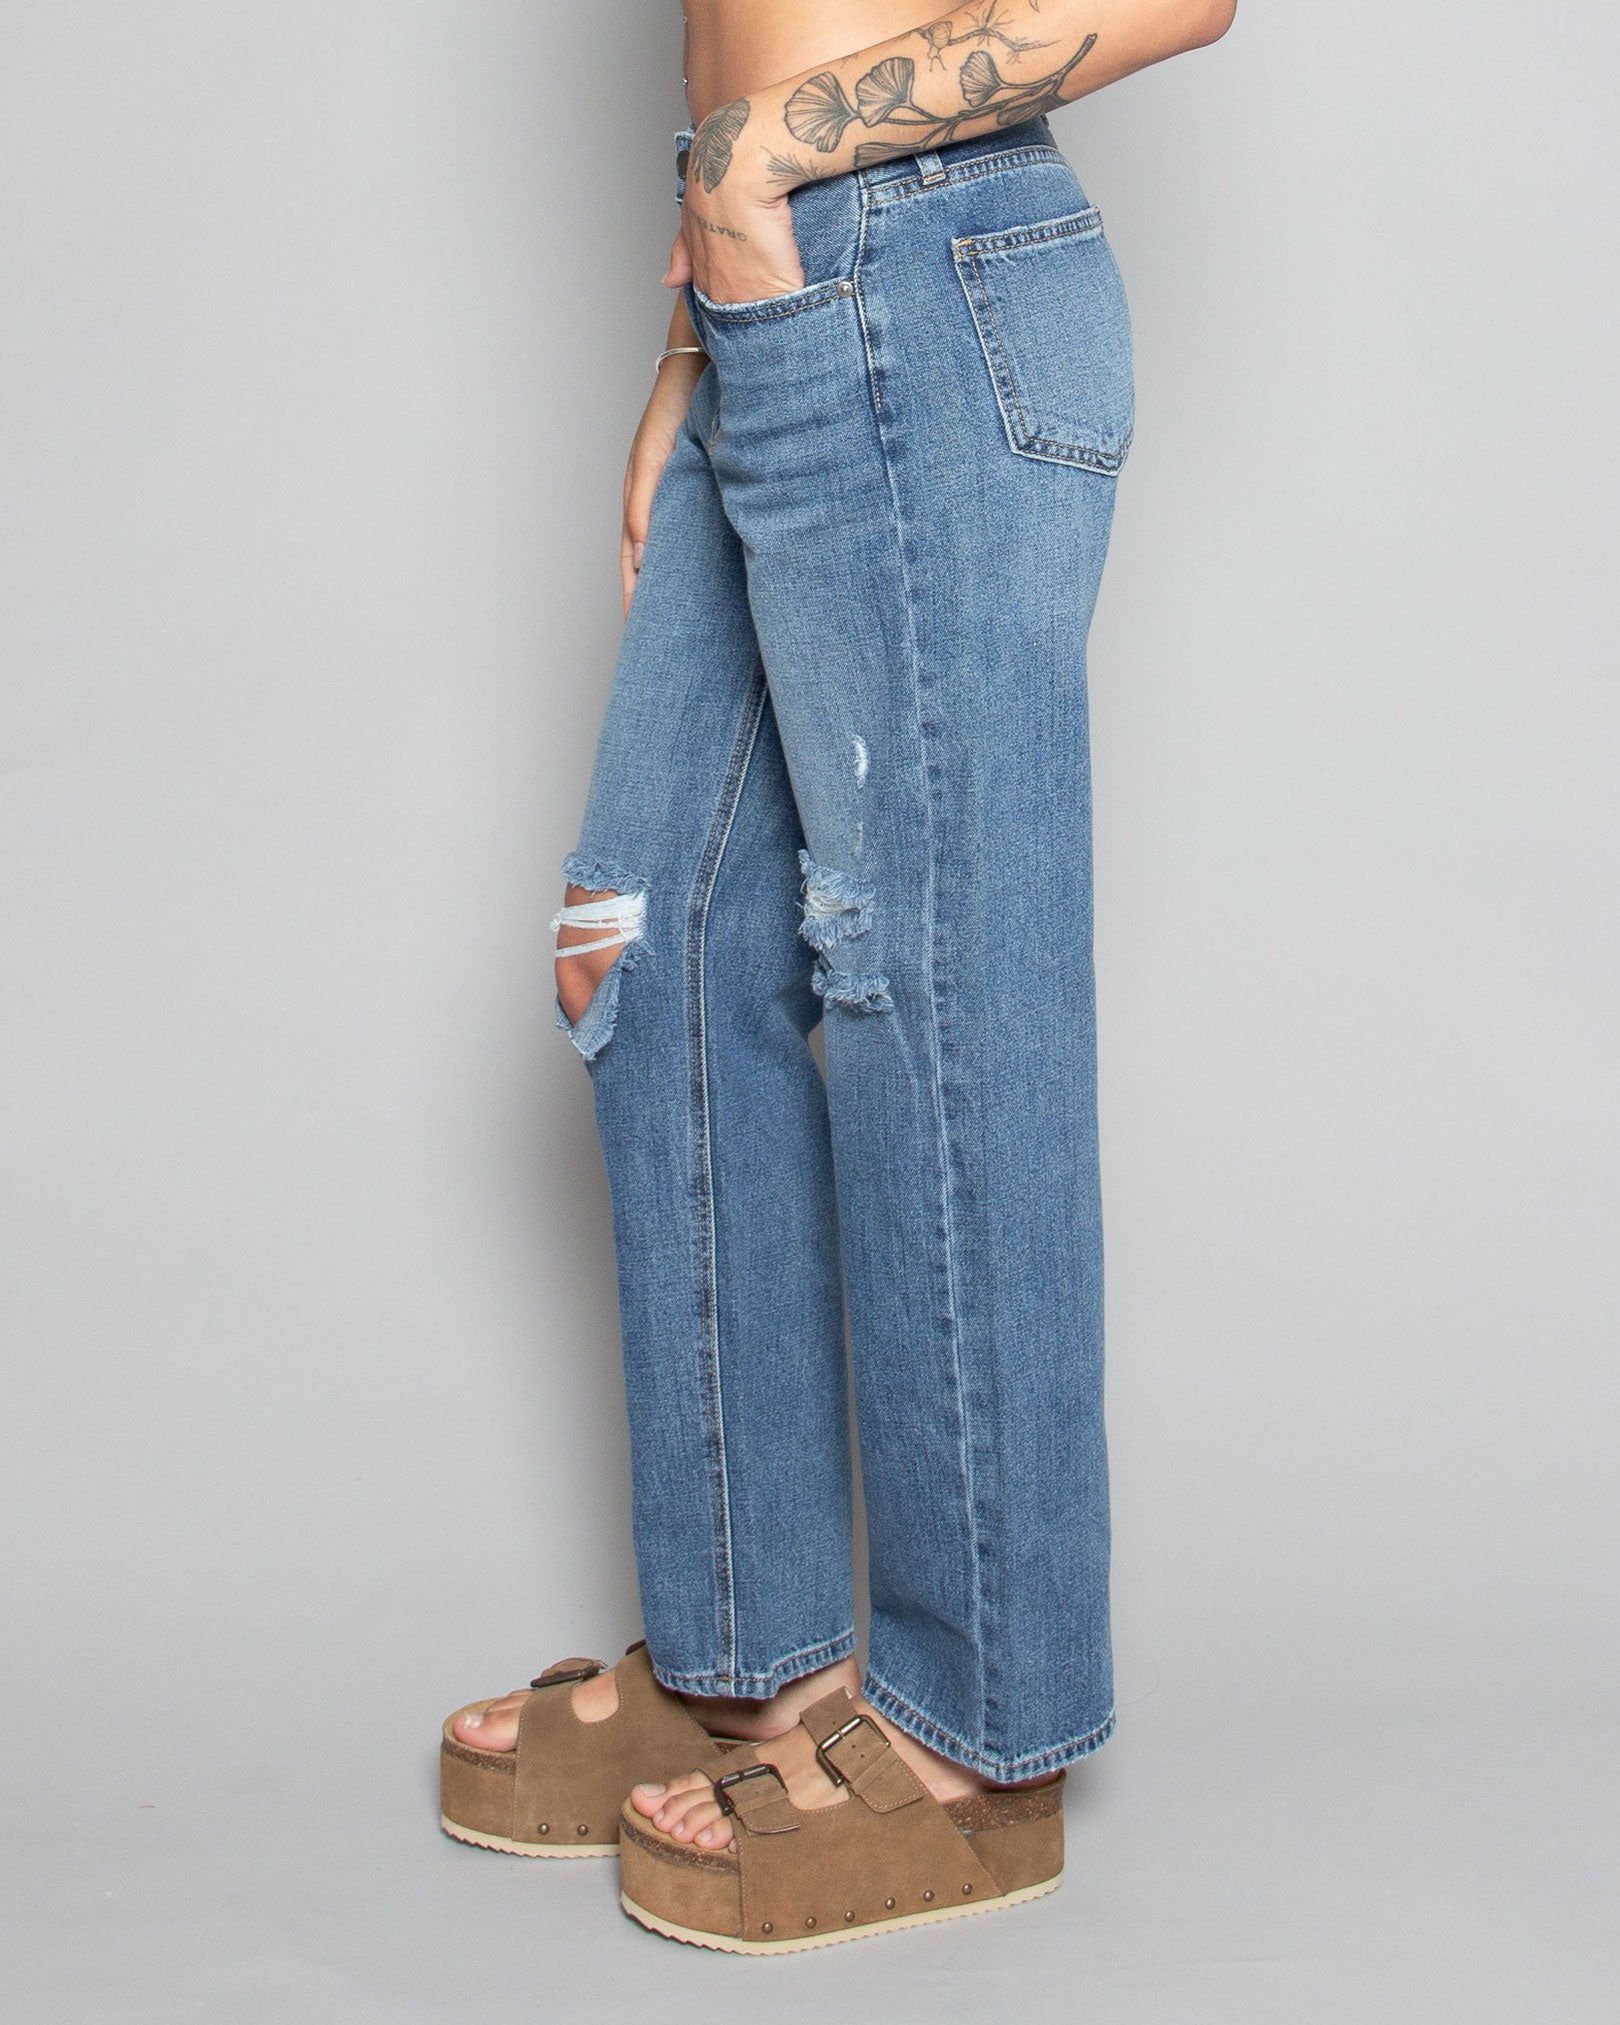 PERSONS Talia Relaxed BF Jeans in Med Wash available at Lahn.shop